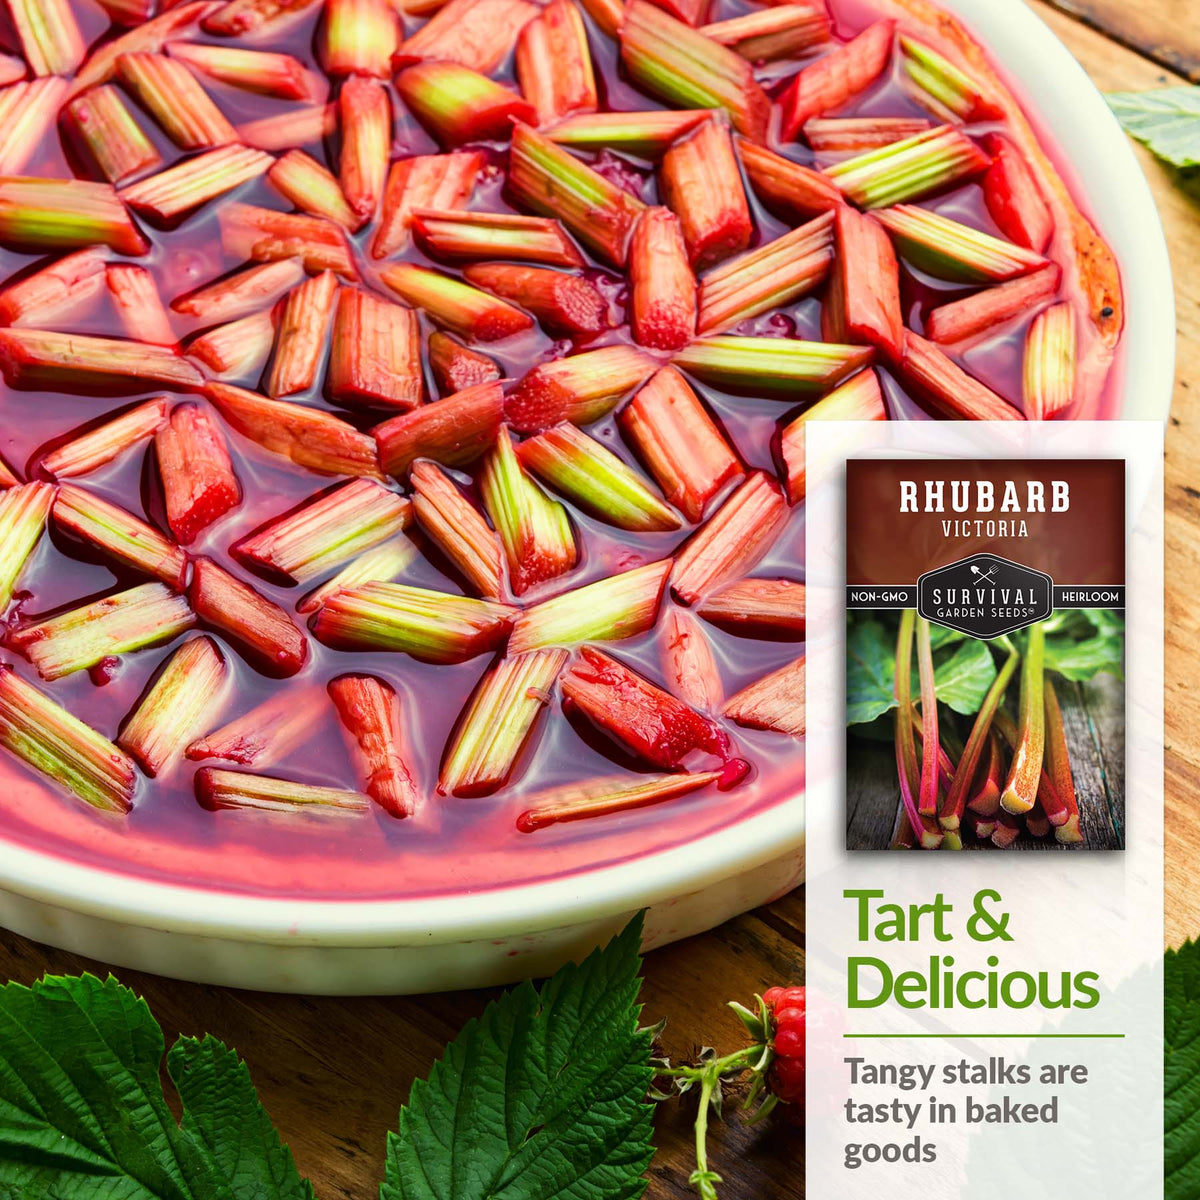 Rhubarb&#39;s tangy stalks are great in baked goods